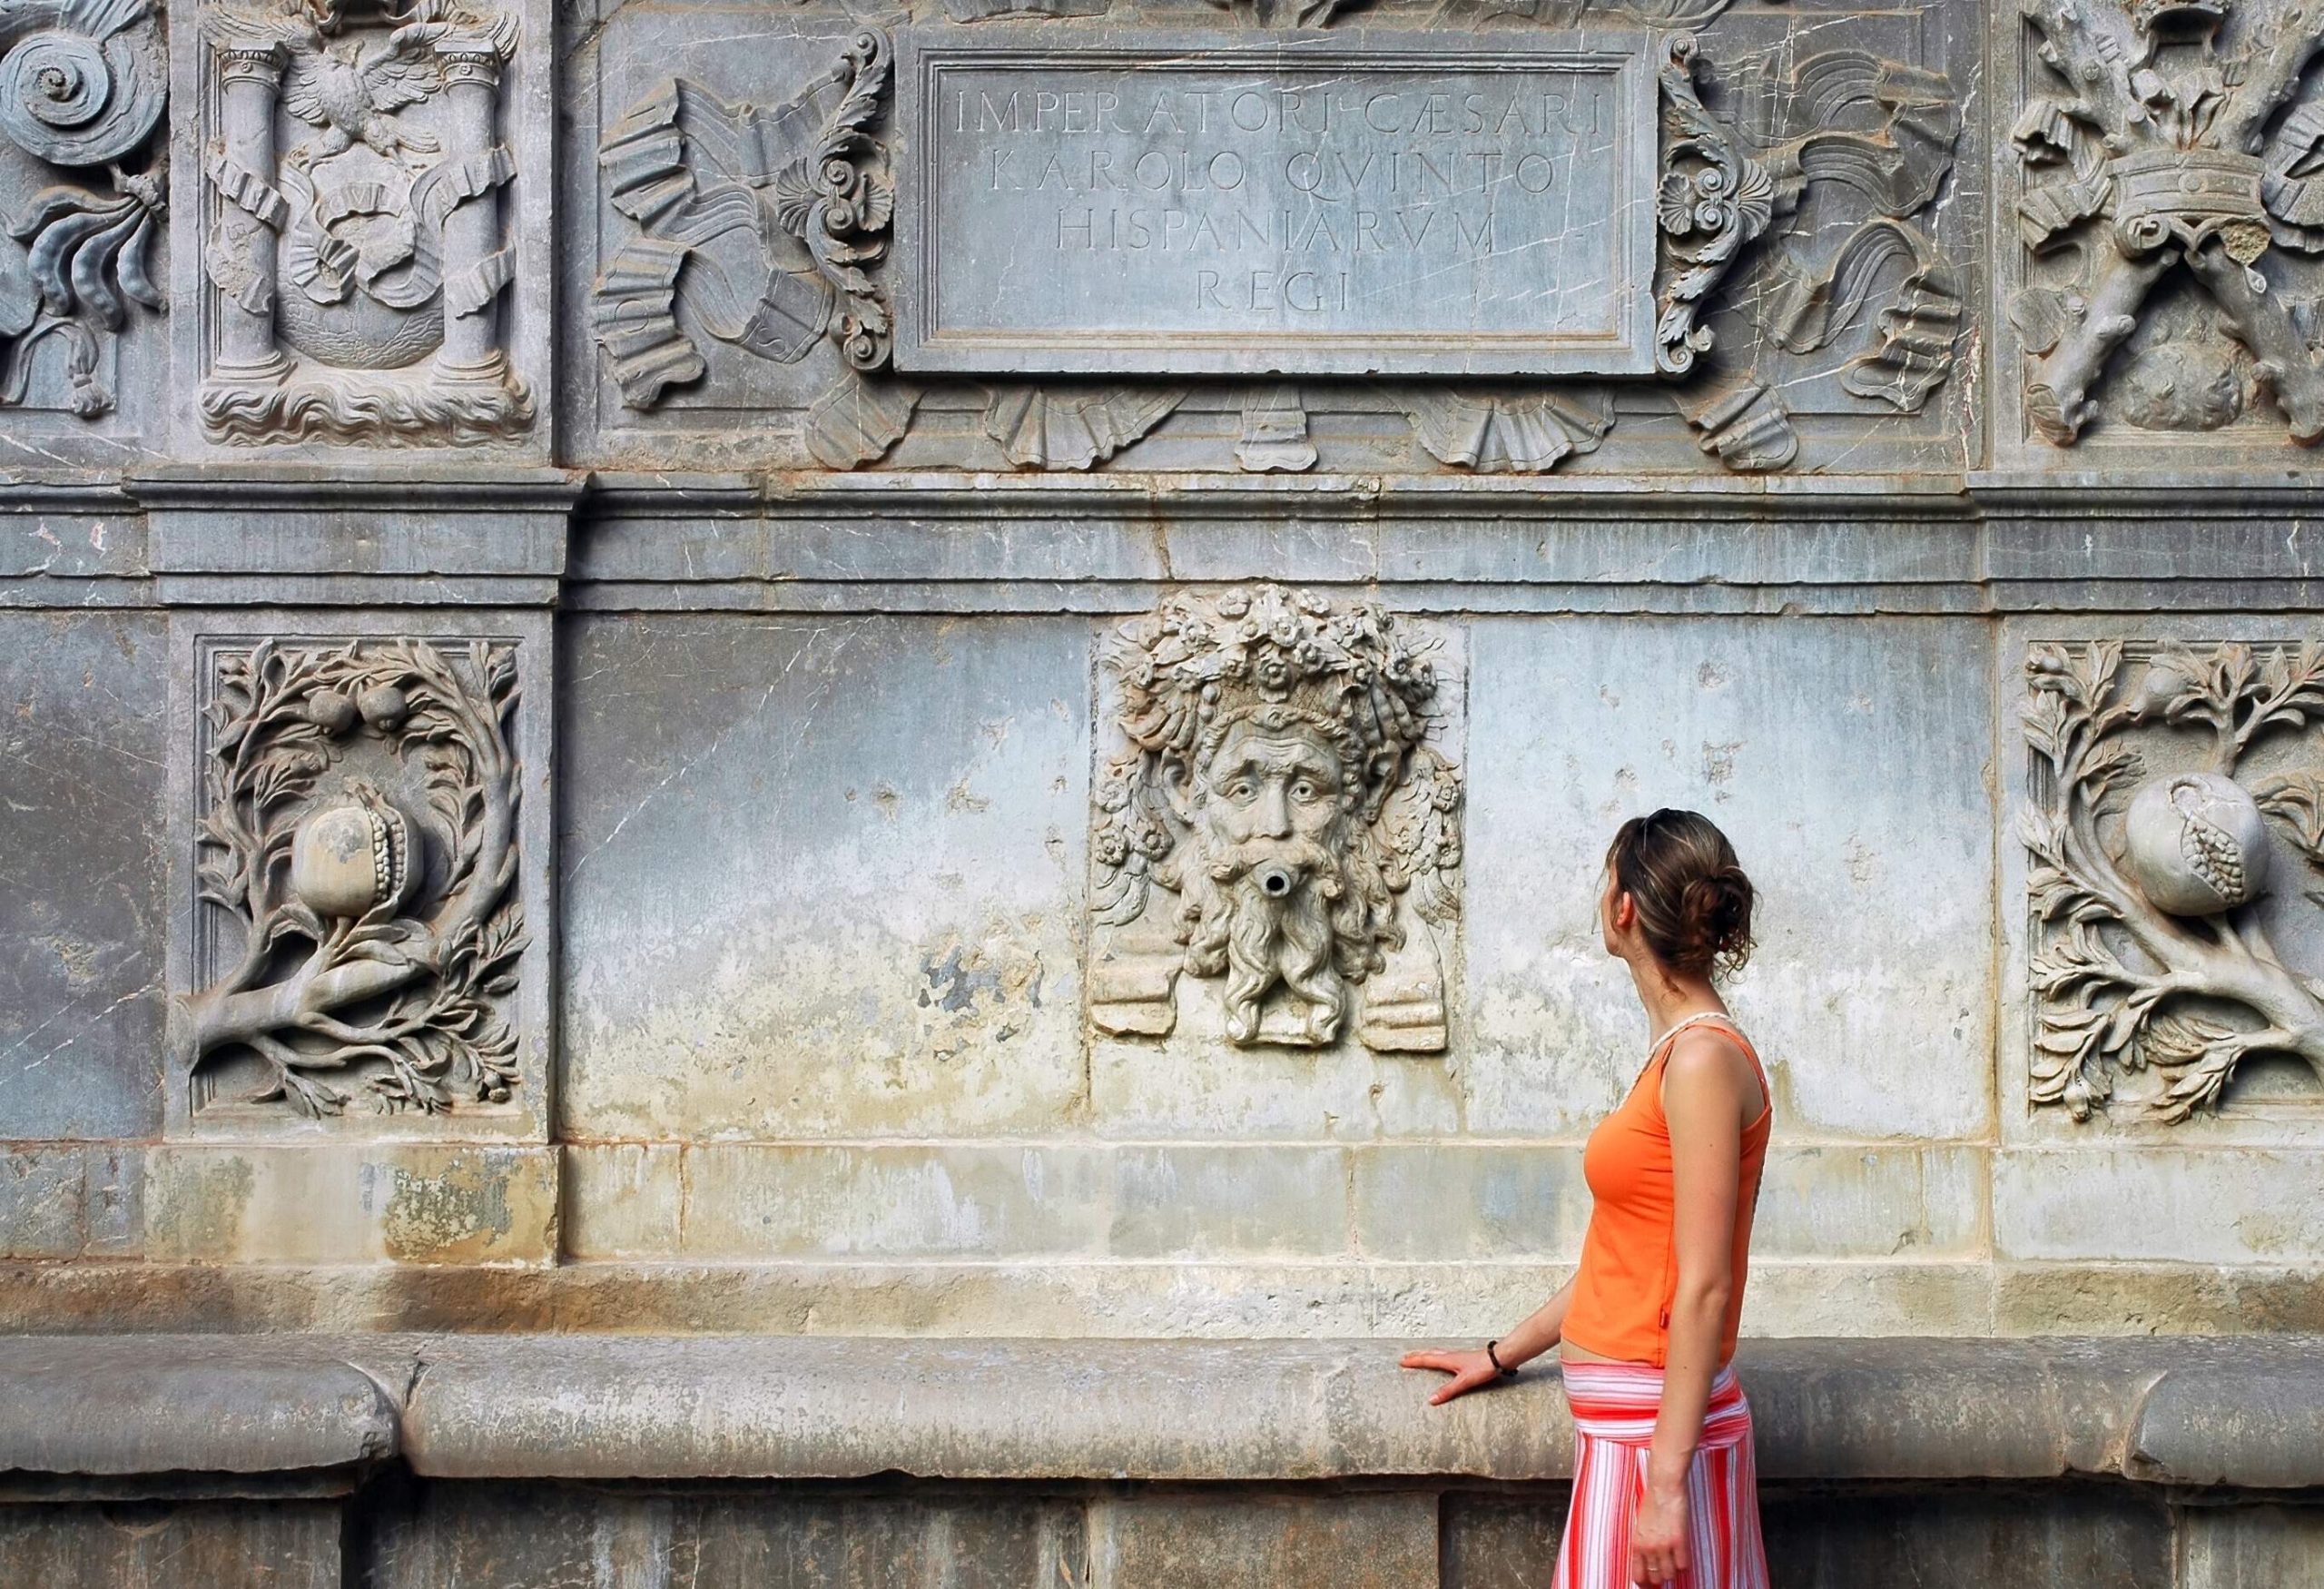 A lady tourist stares blankly at the ornate carvings on the stone wall.